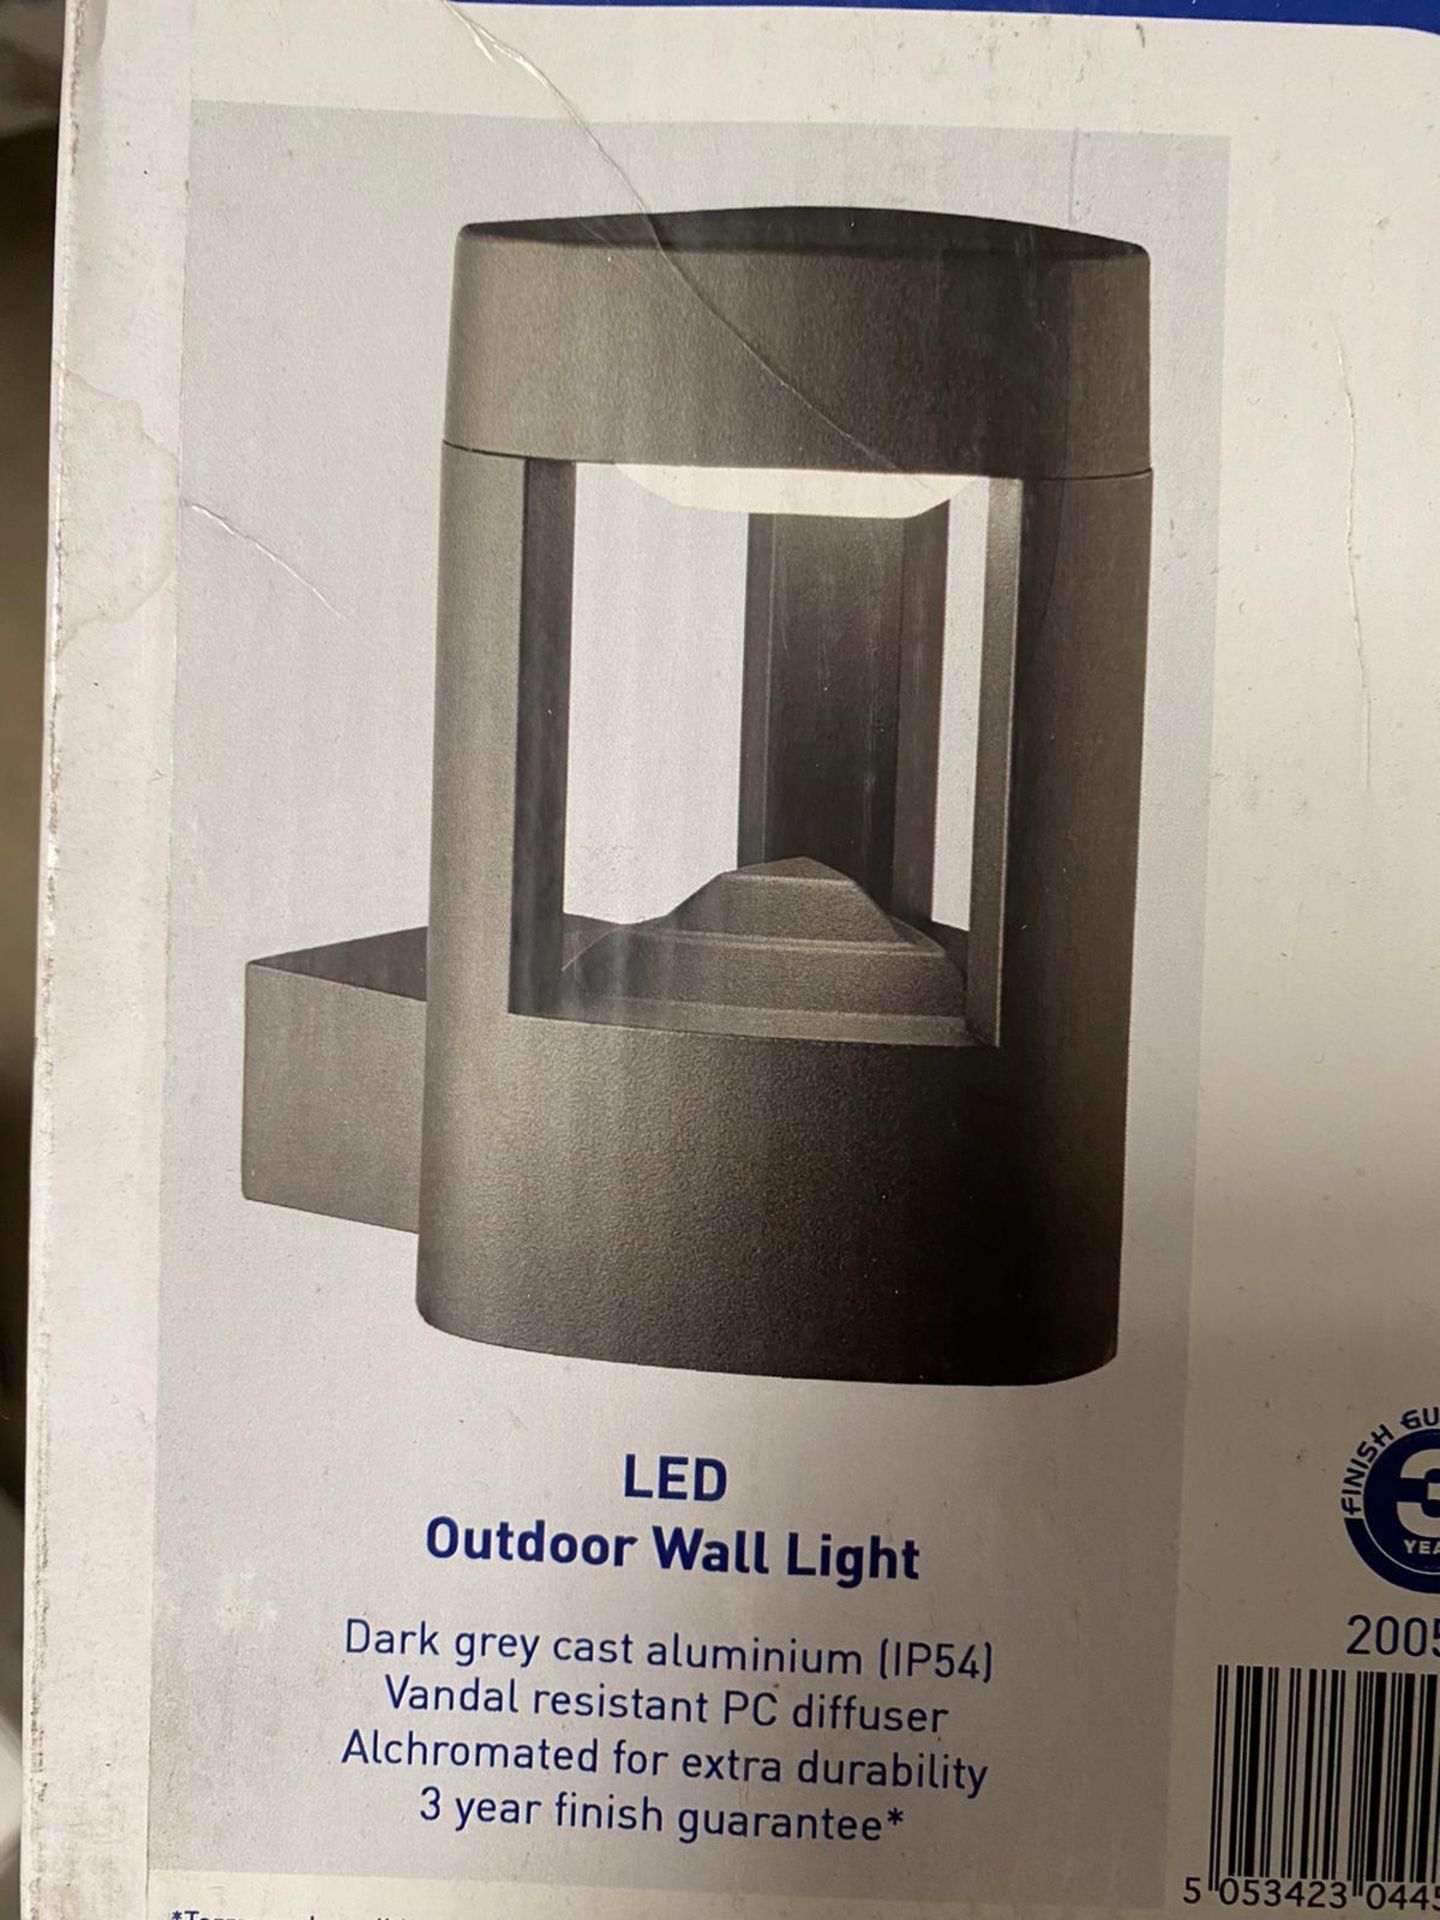 2 x Searchlight LED Outdoor Wall Light - Ref: 2005GY - New and Boxed Stock - RRP: £105(each) - Image 2 of 4